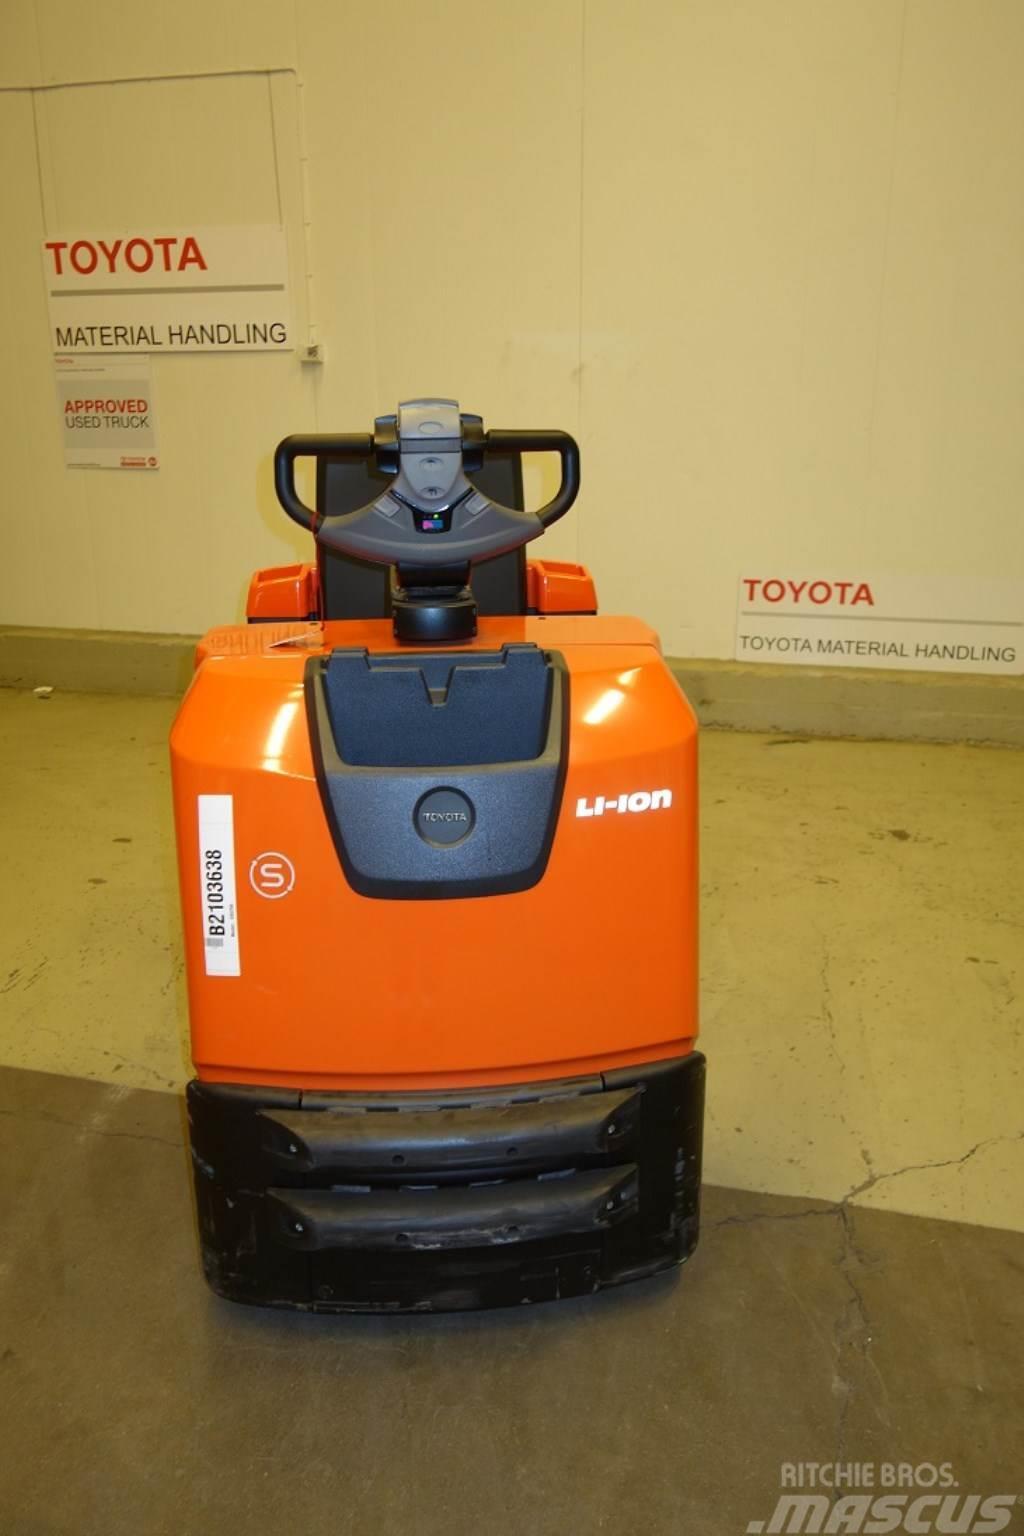 Toyota OSE250 Low lift order picker